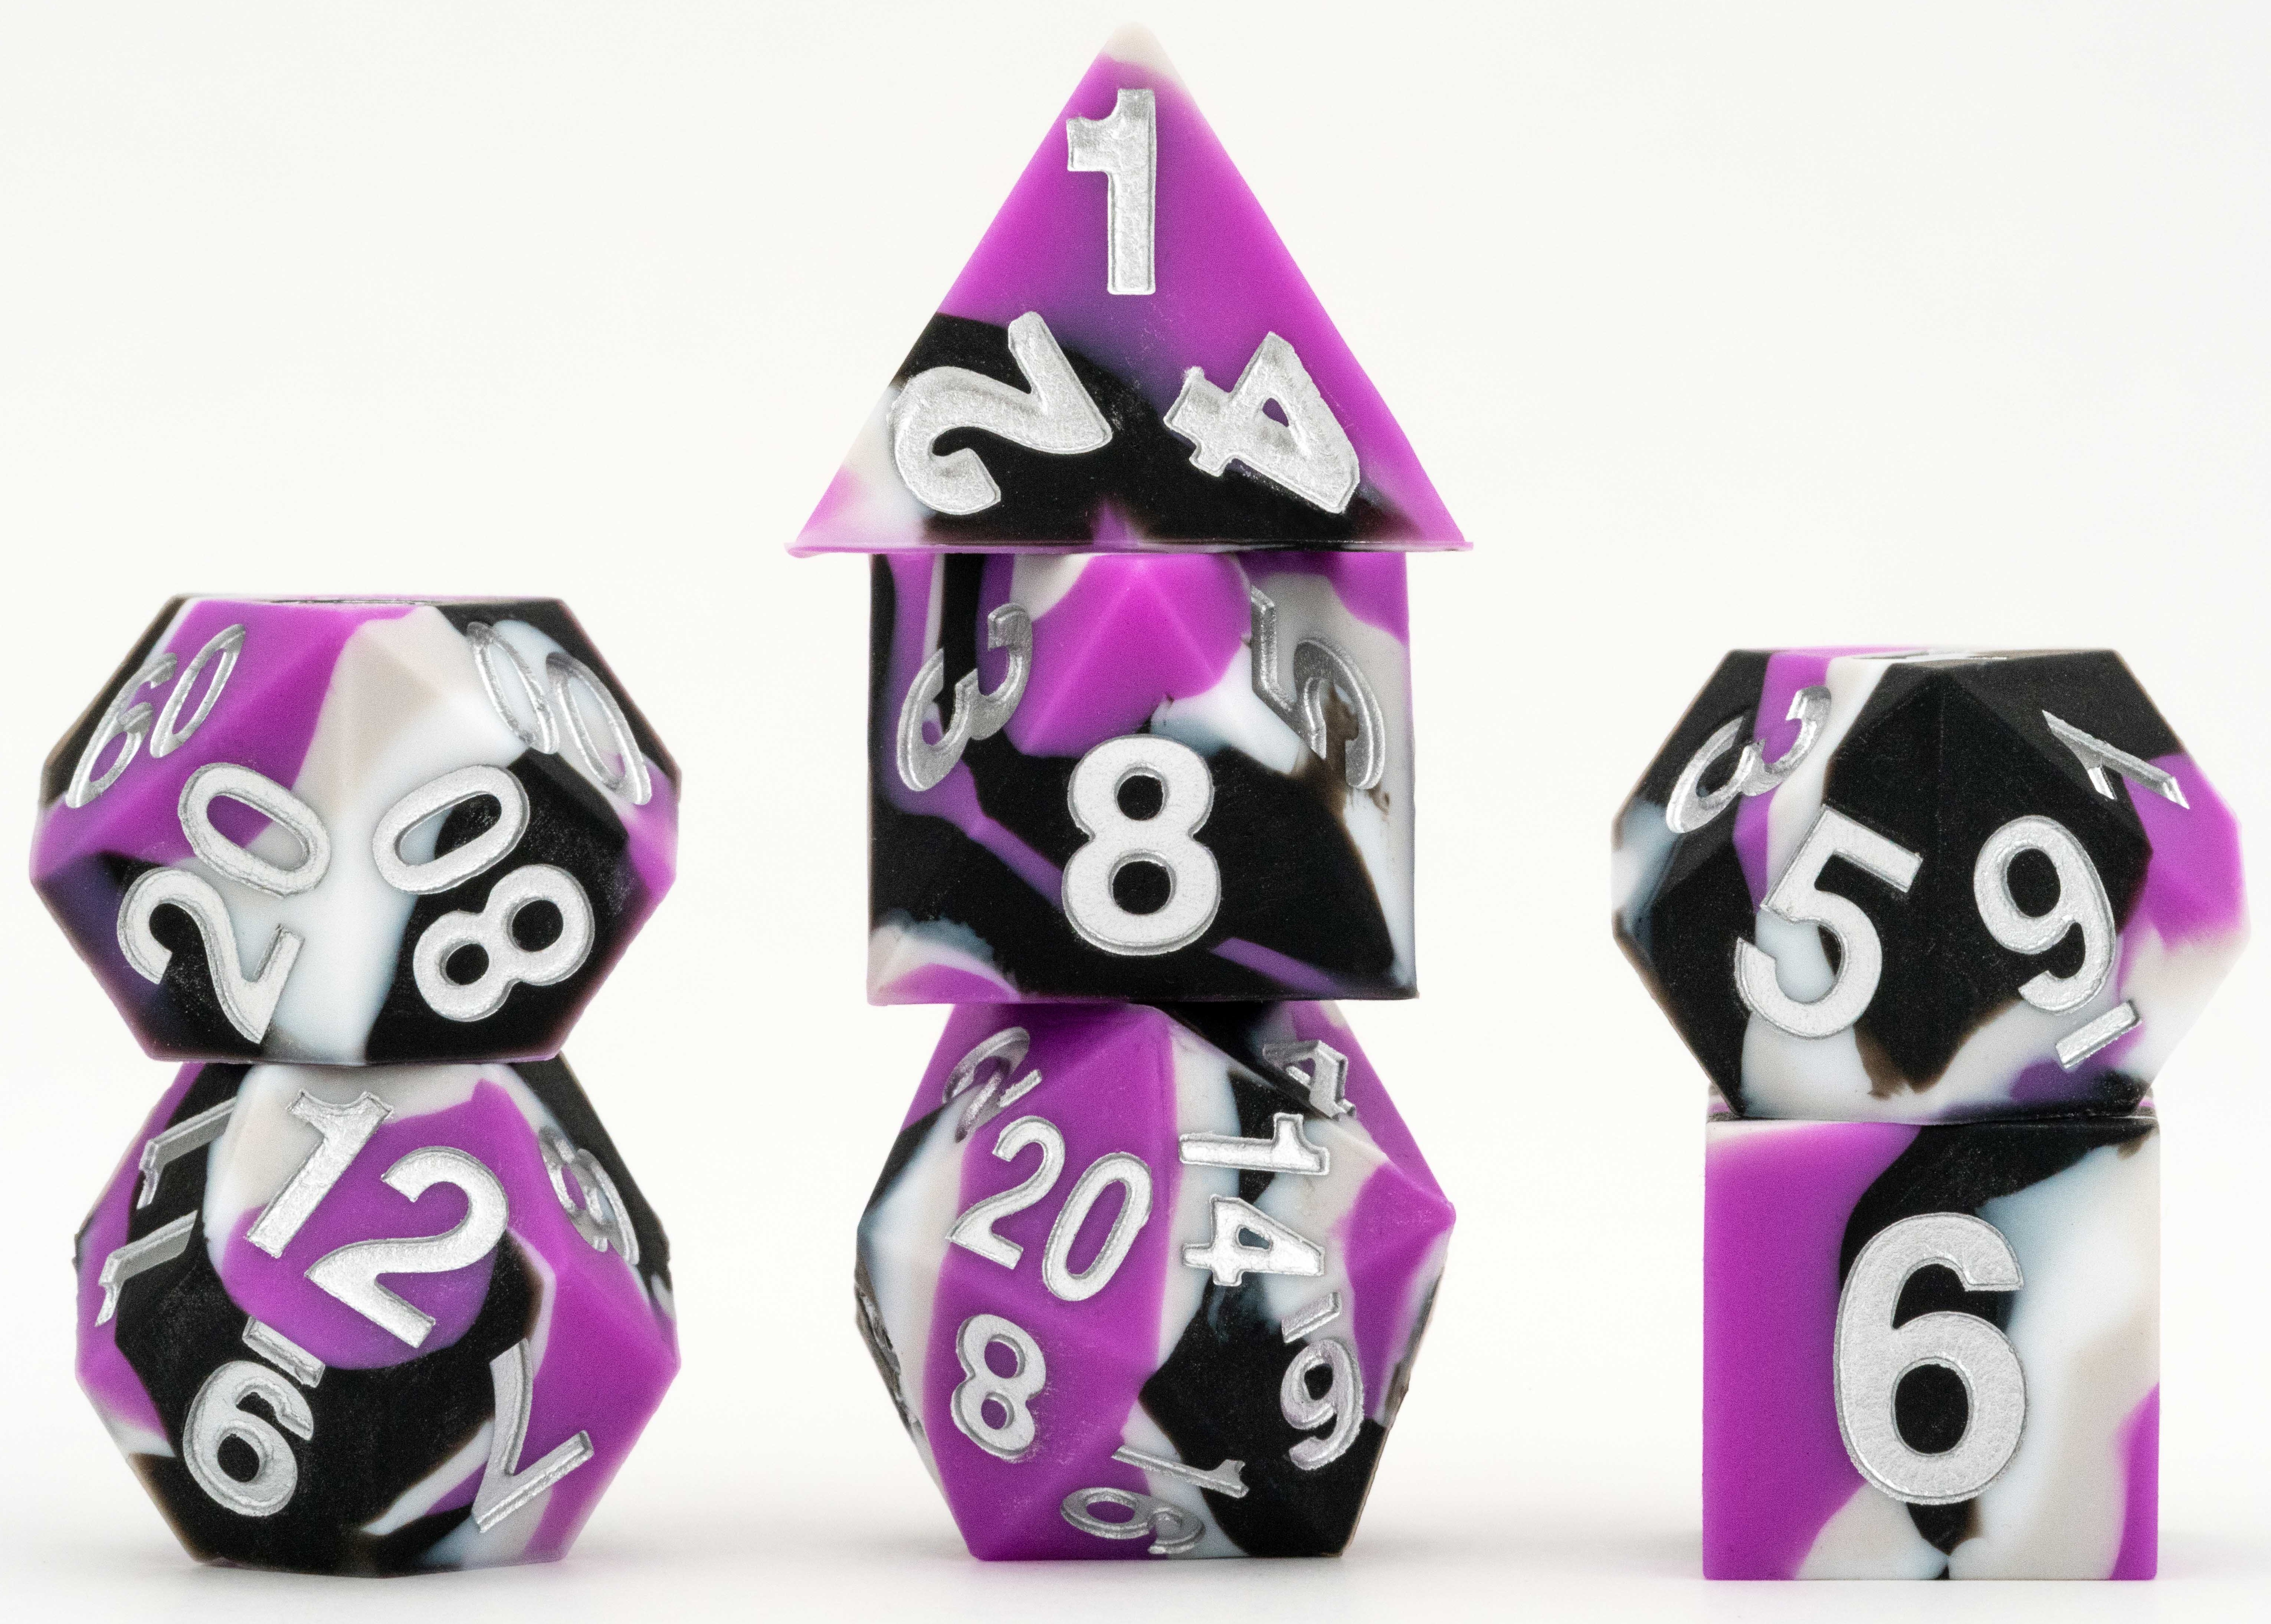 Fanroll: Silicone Sharp Edge 7 Dice Polyhedral Set: Pride Asexual 